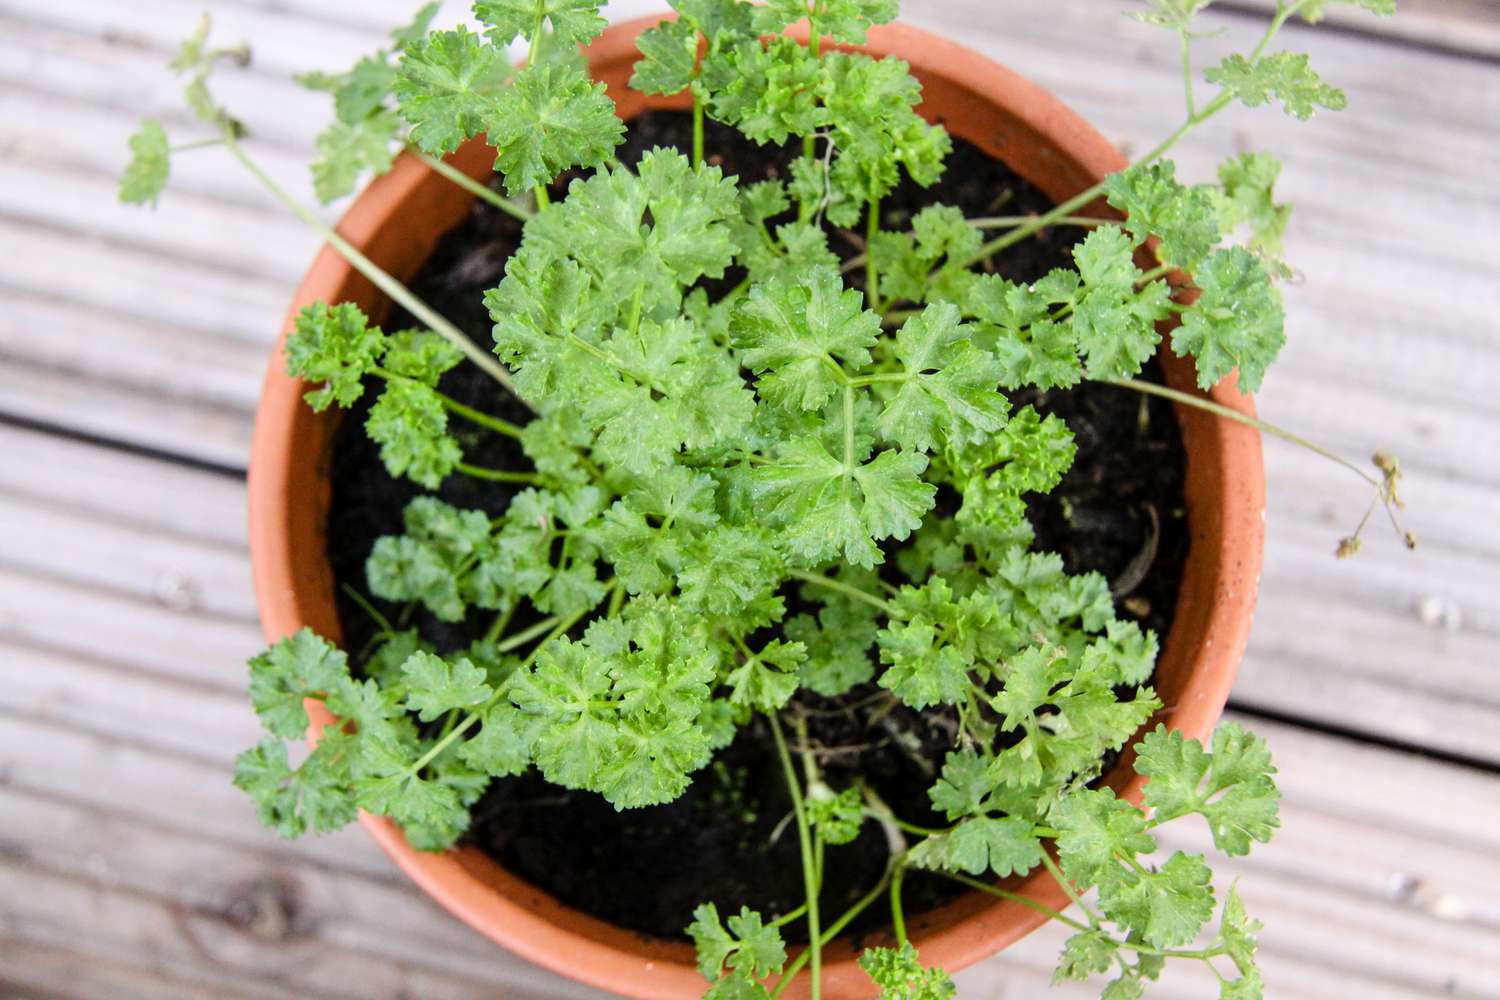 Potted parsley